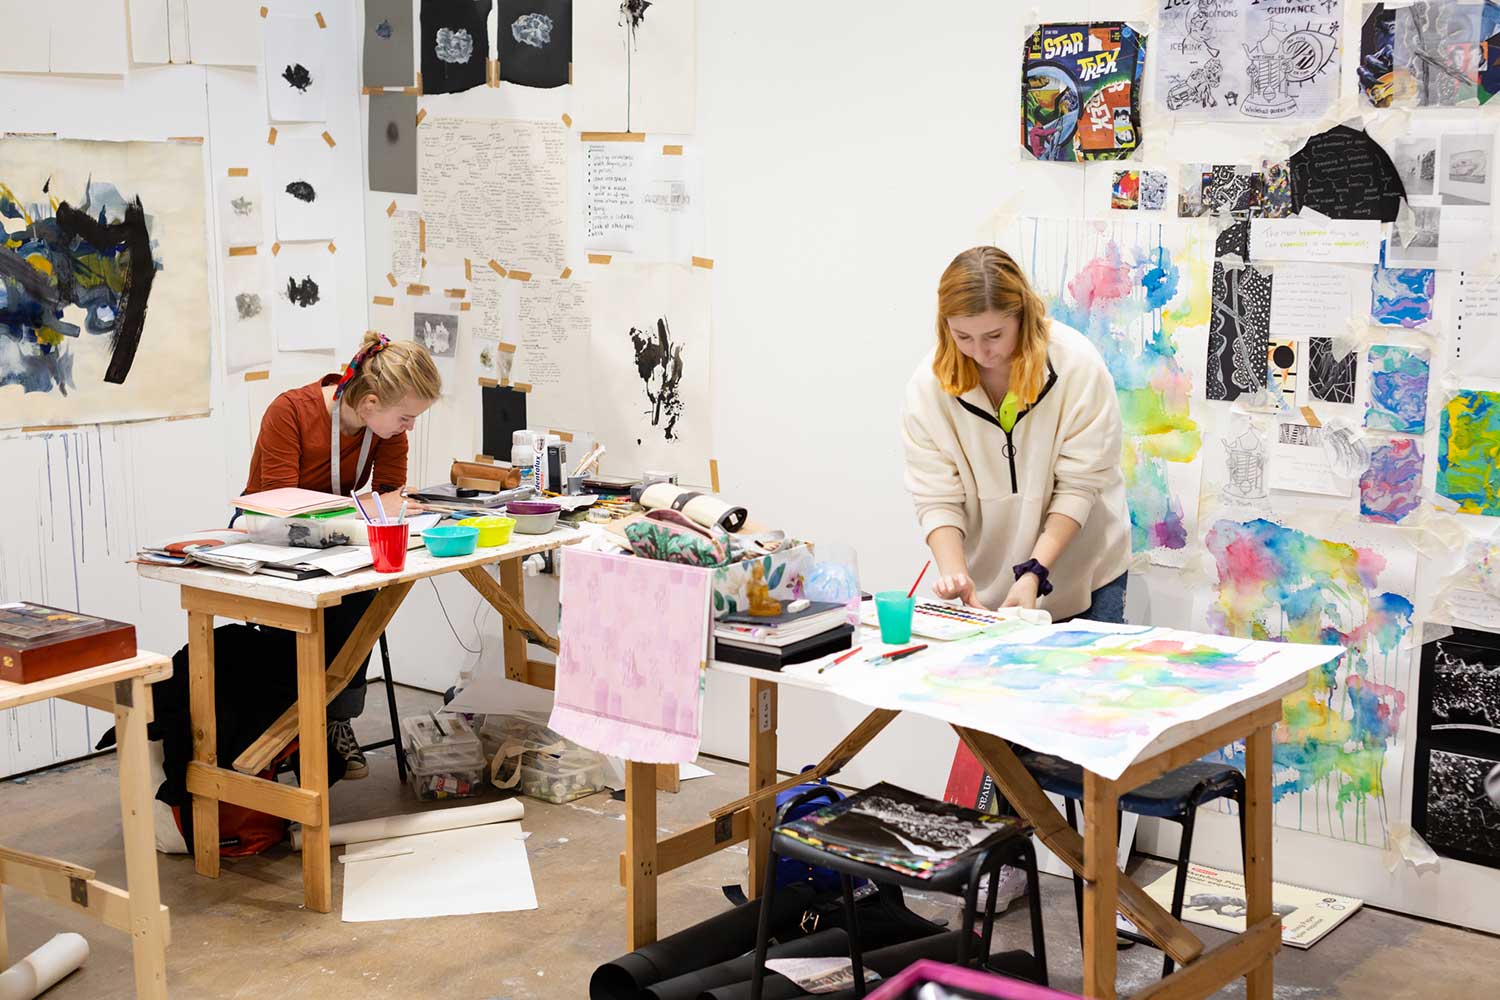 Two students stand at their desks, preparing pieces of artwork